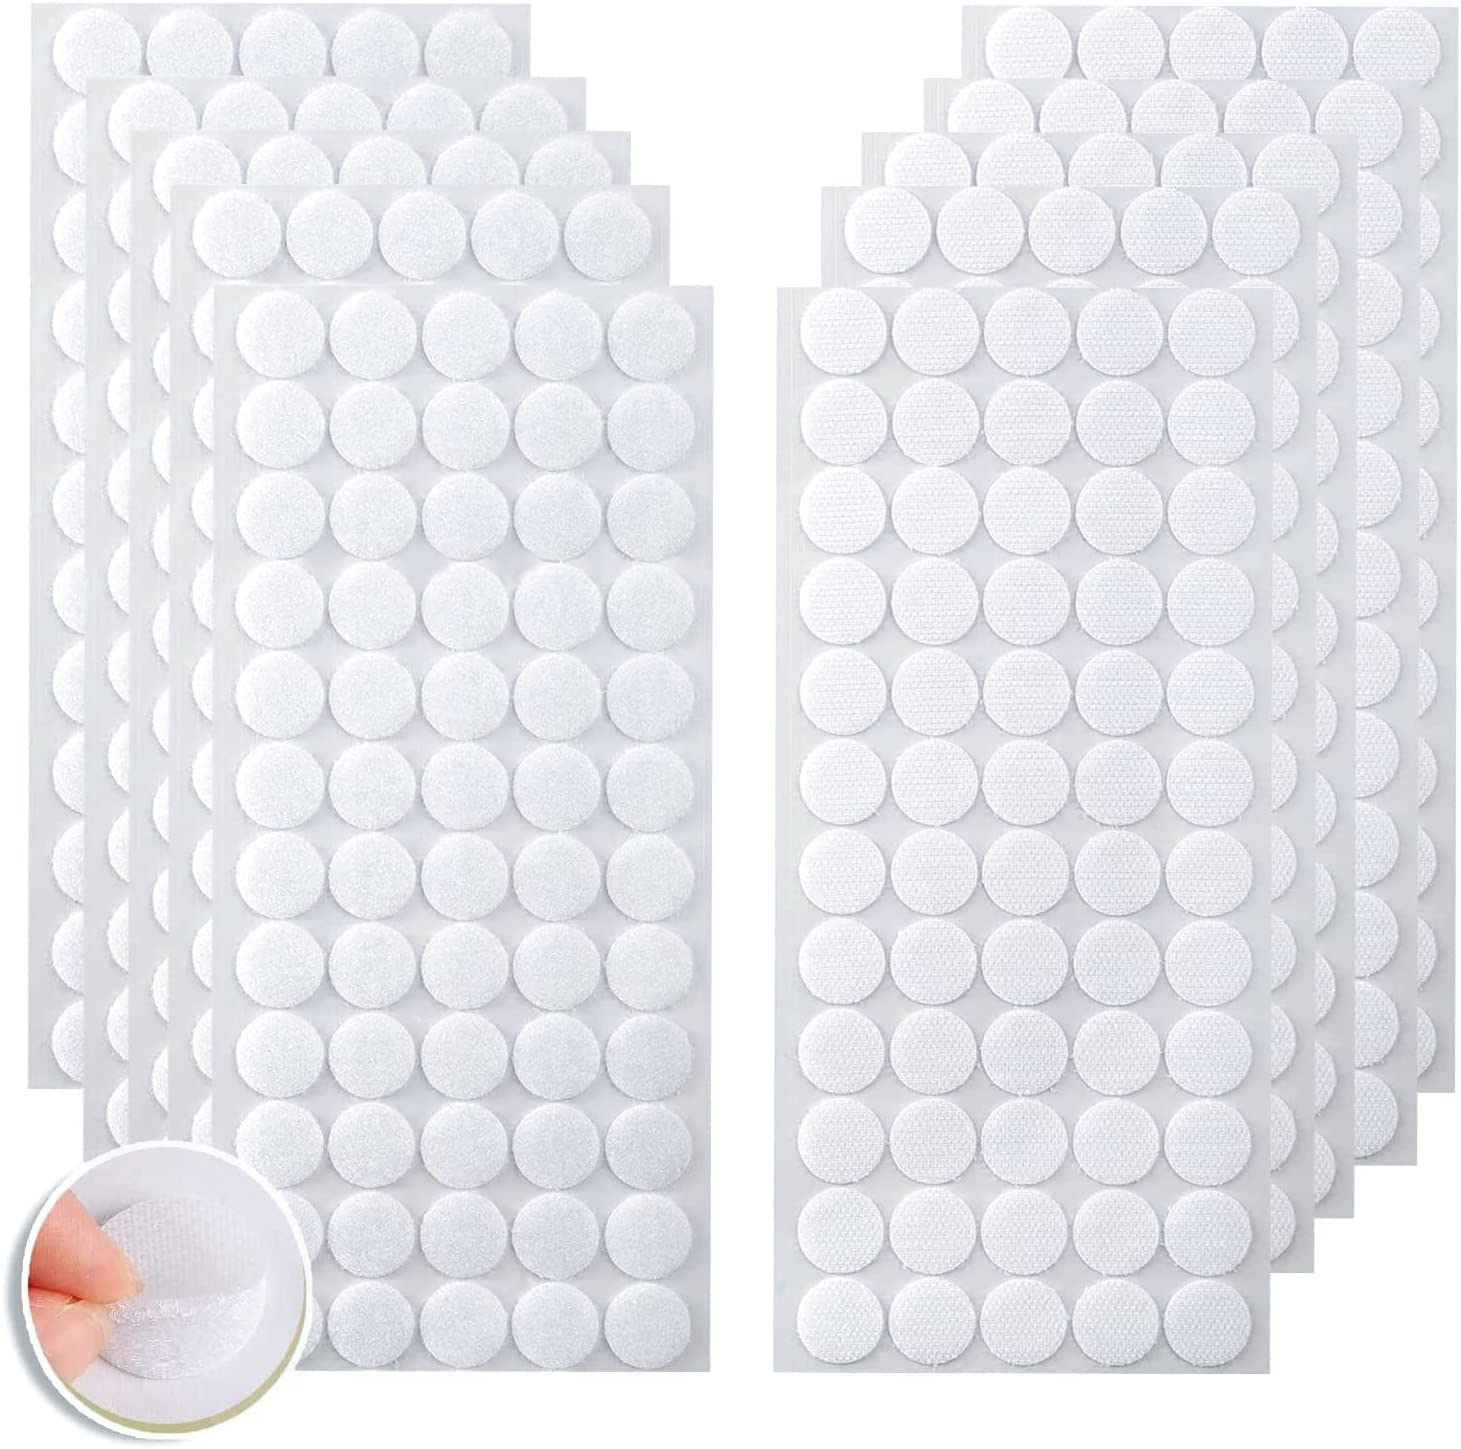 Self Adhesive Dots 600PCS (300 Pairs) 0.75/20mm Diameter Sticky Back Coins  Magic Sticky Dots Waterproof Hook & Loop Dots with Adhesive for Art Craft  Classroom Office Home Deco White white 0.78inch/20mm